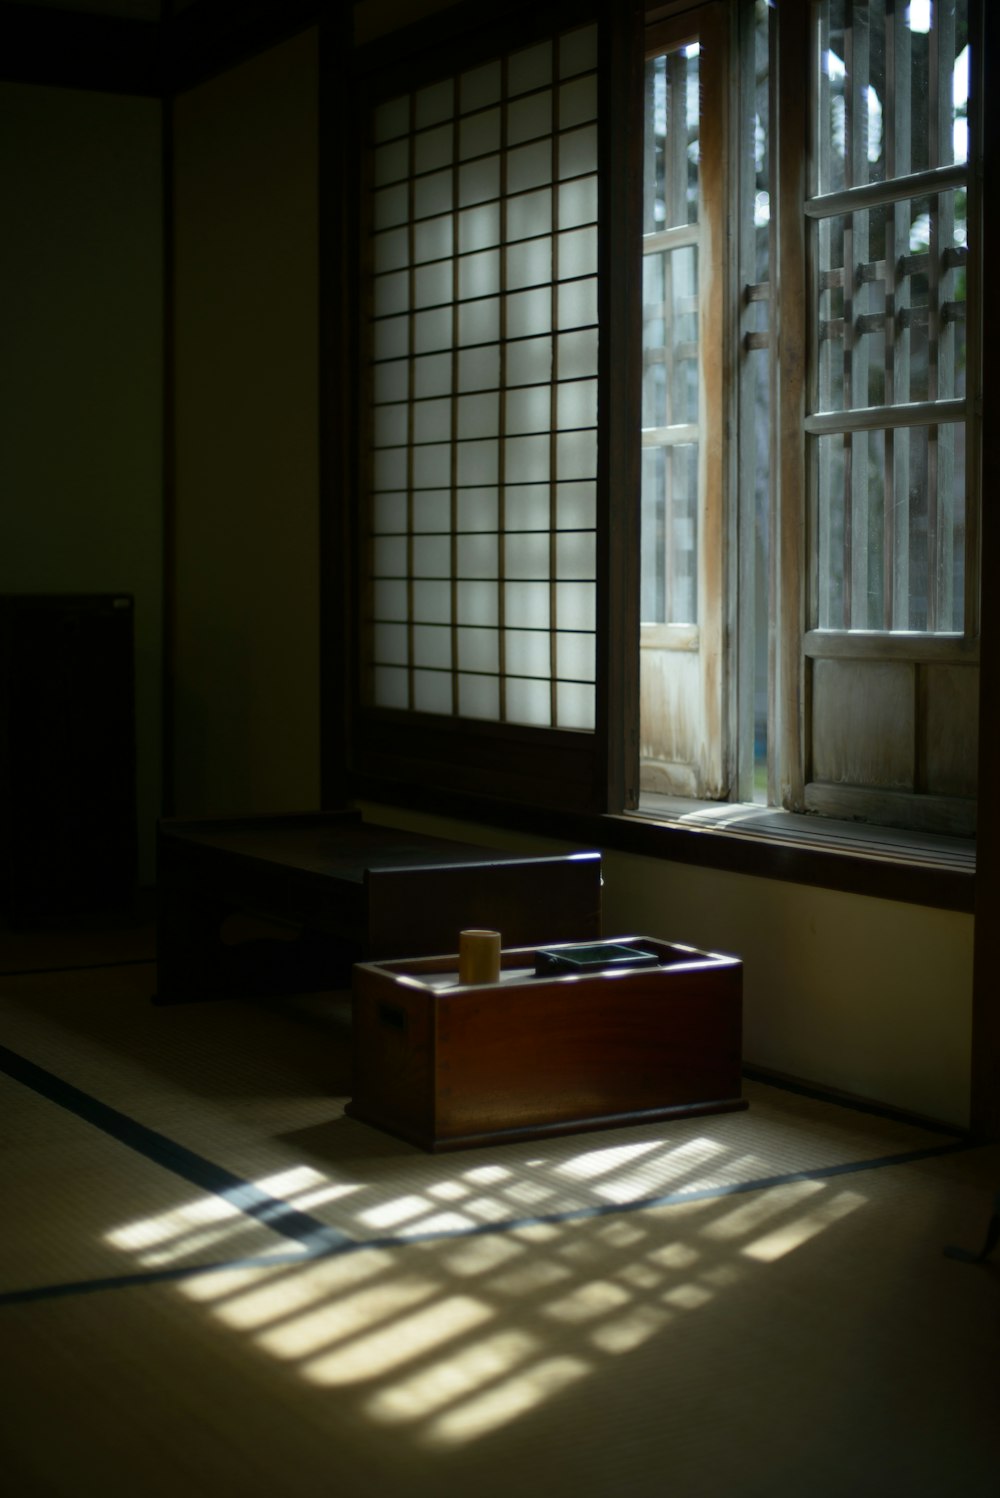 a box sitting on the floor in front of a window